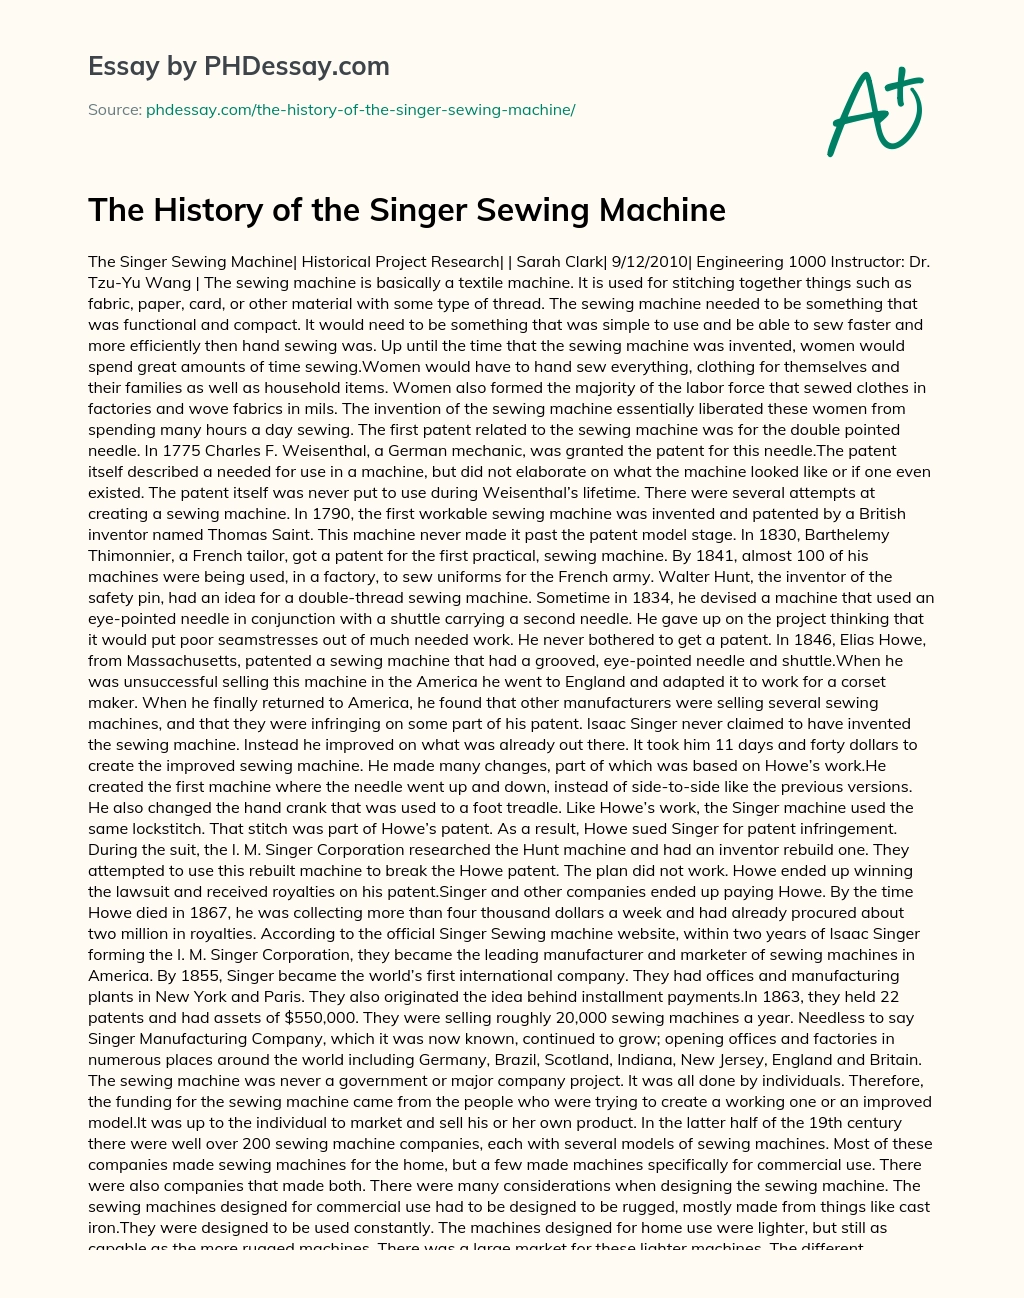 The History of the Singer Sewing Machine essay